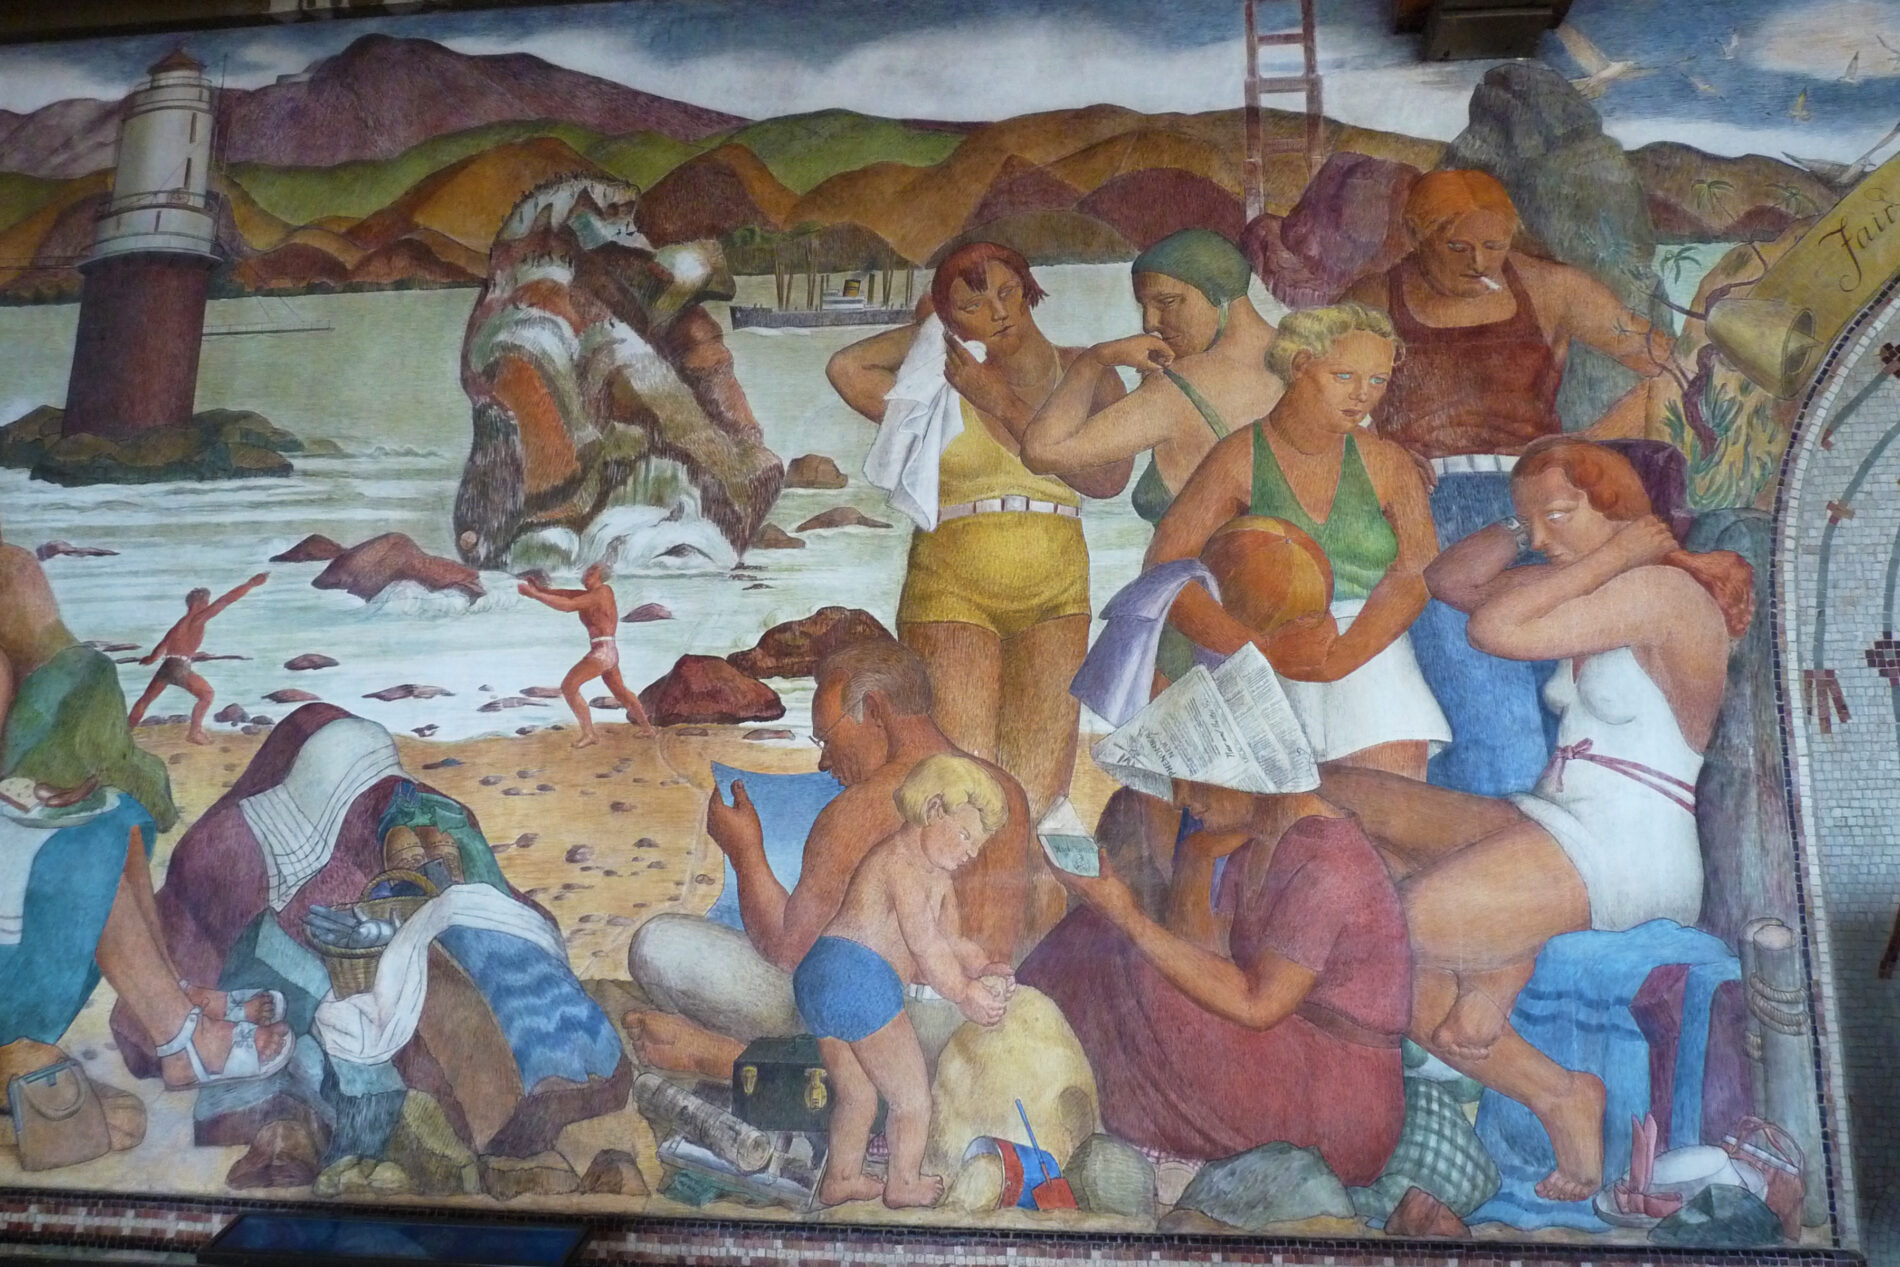 One section of a depression era mural at Beach Chalet in San Francisco. It shows families enjoying the beach.